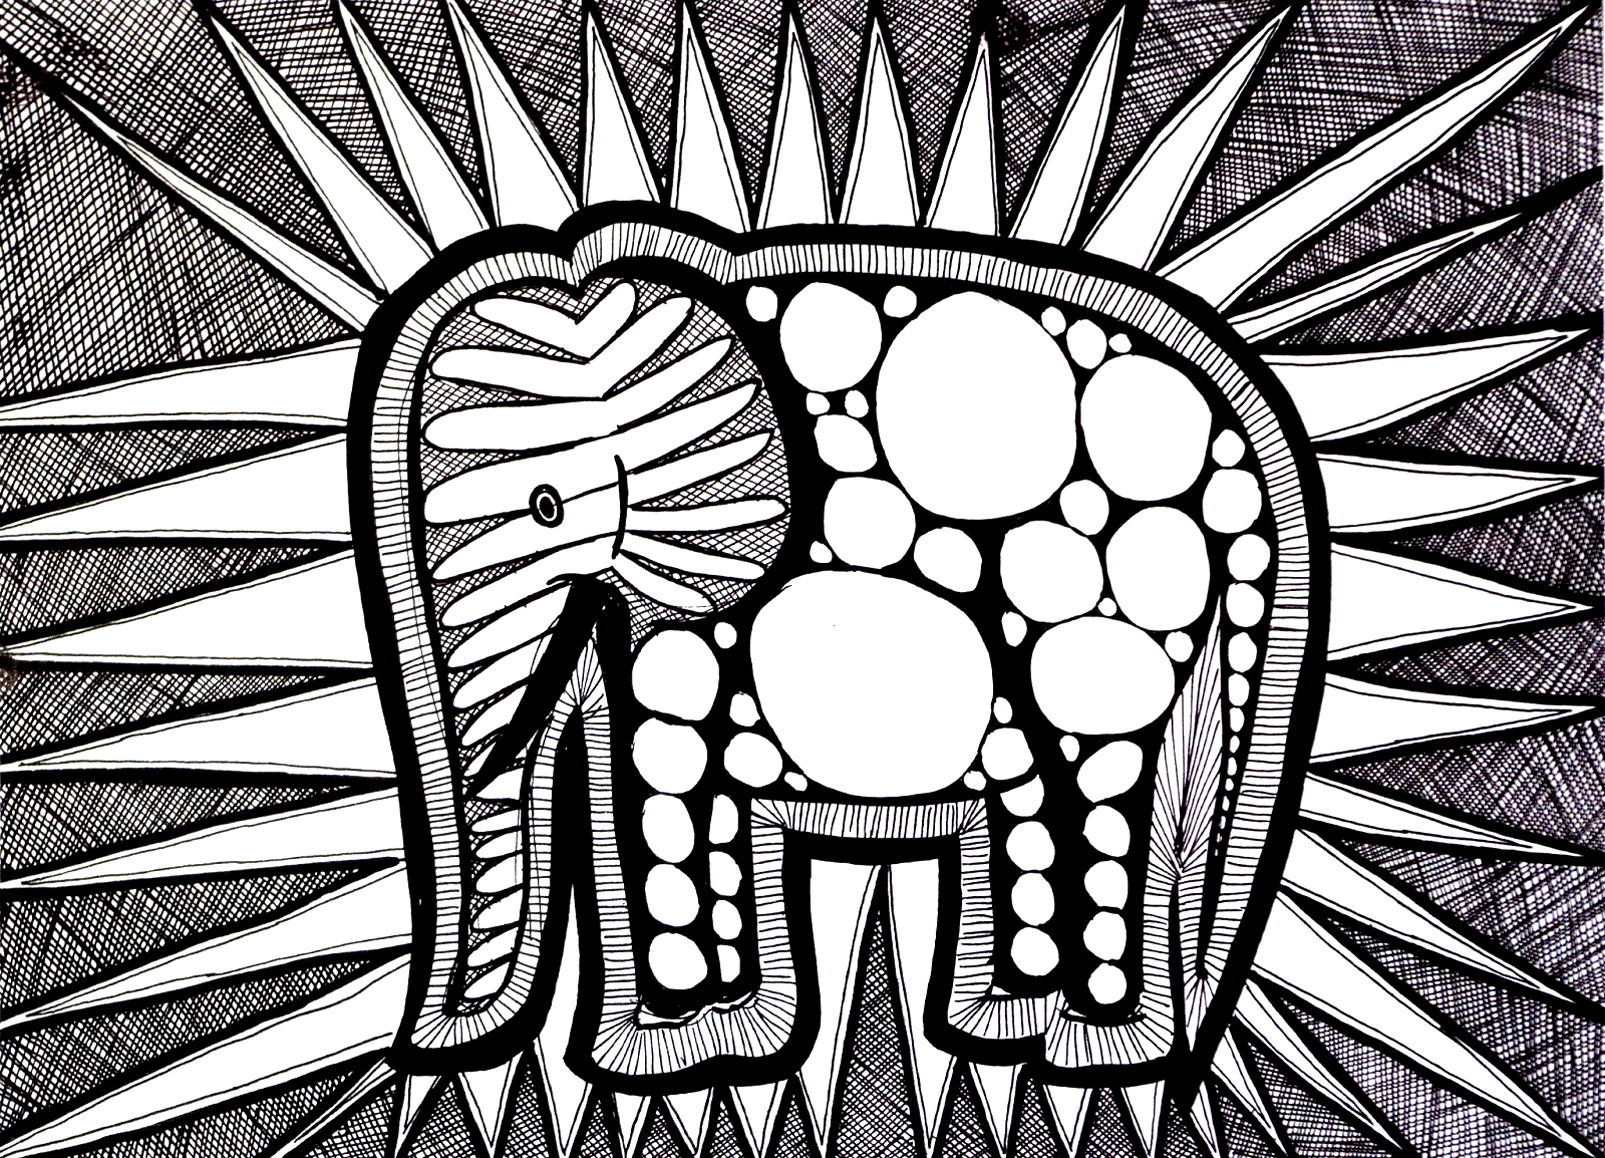 Adult Coloring difficult of an elephant, made up of many diverse shapes and patterns. Many areas coloring with markers for preference!